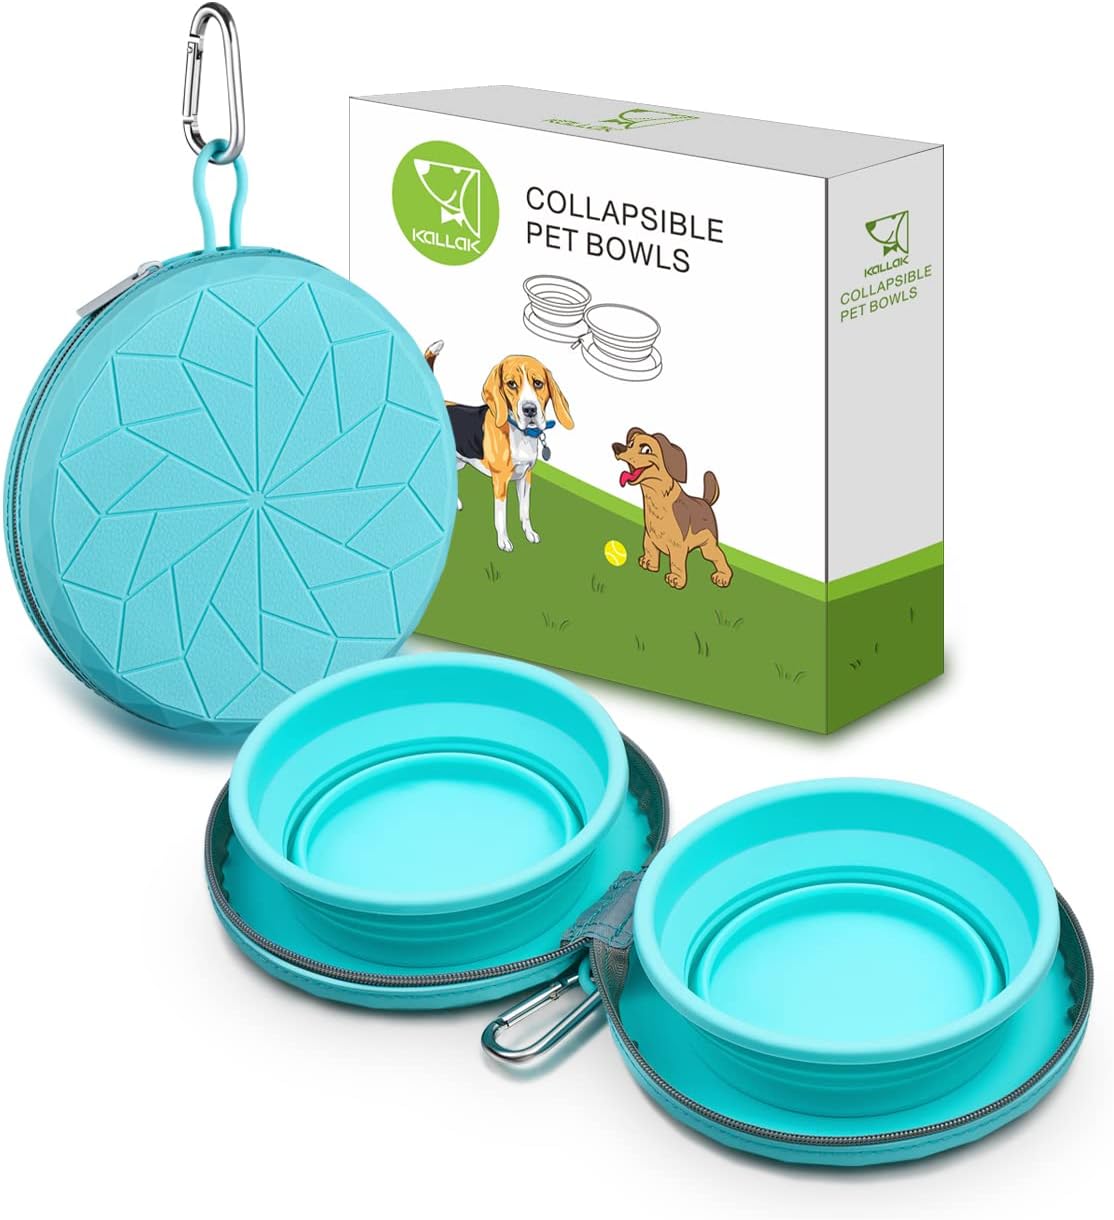 Collapsible Travel Food and water bowls